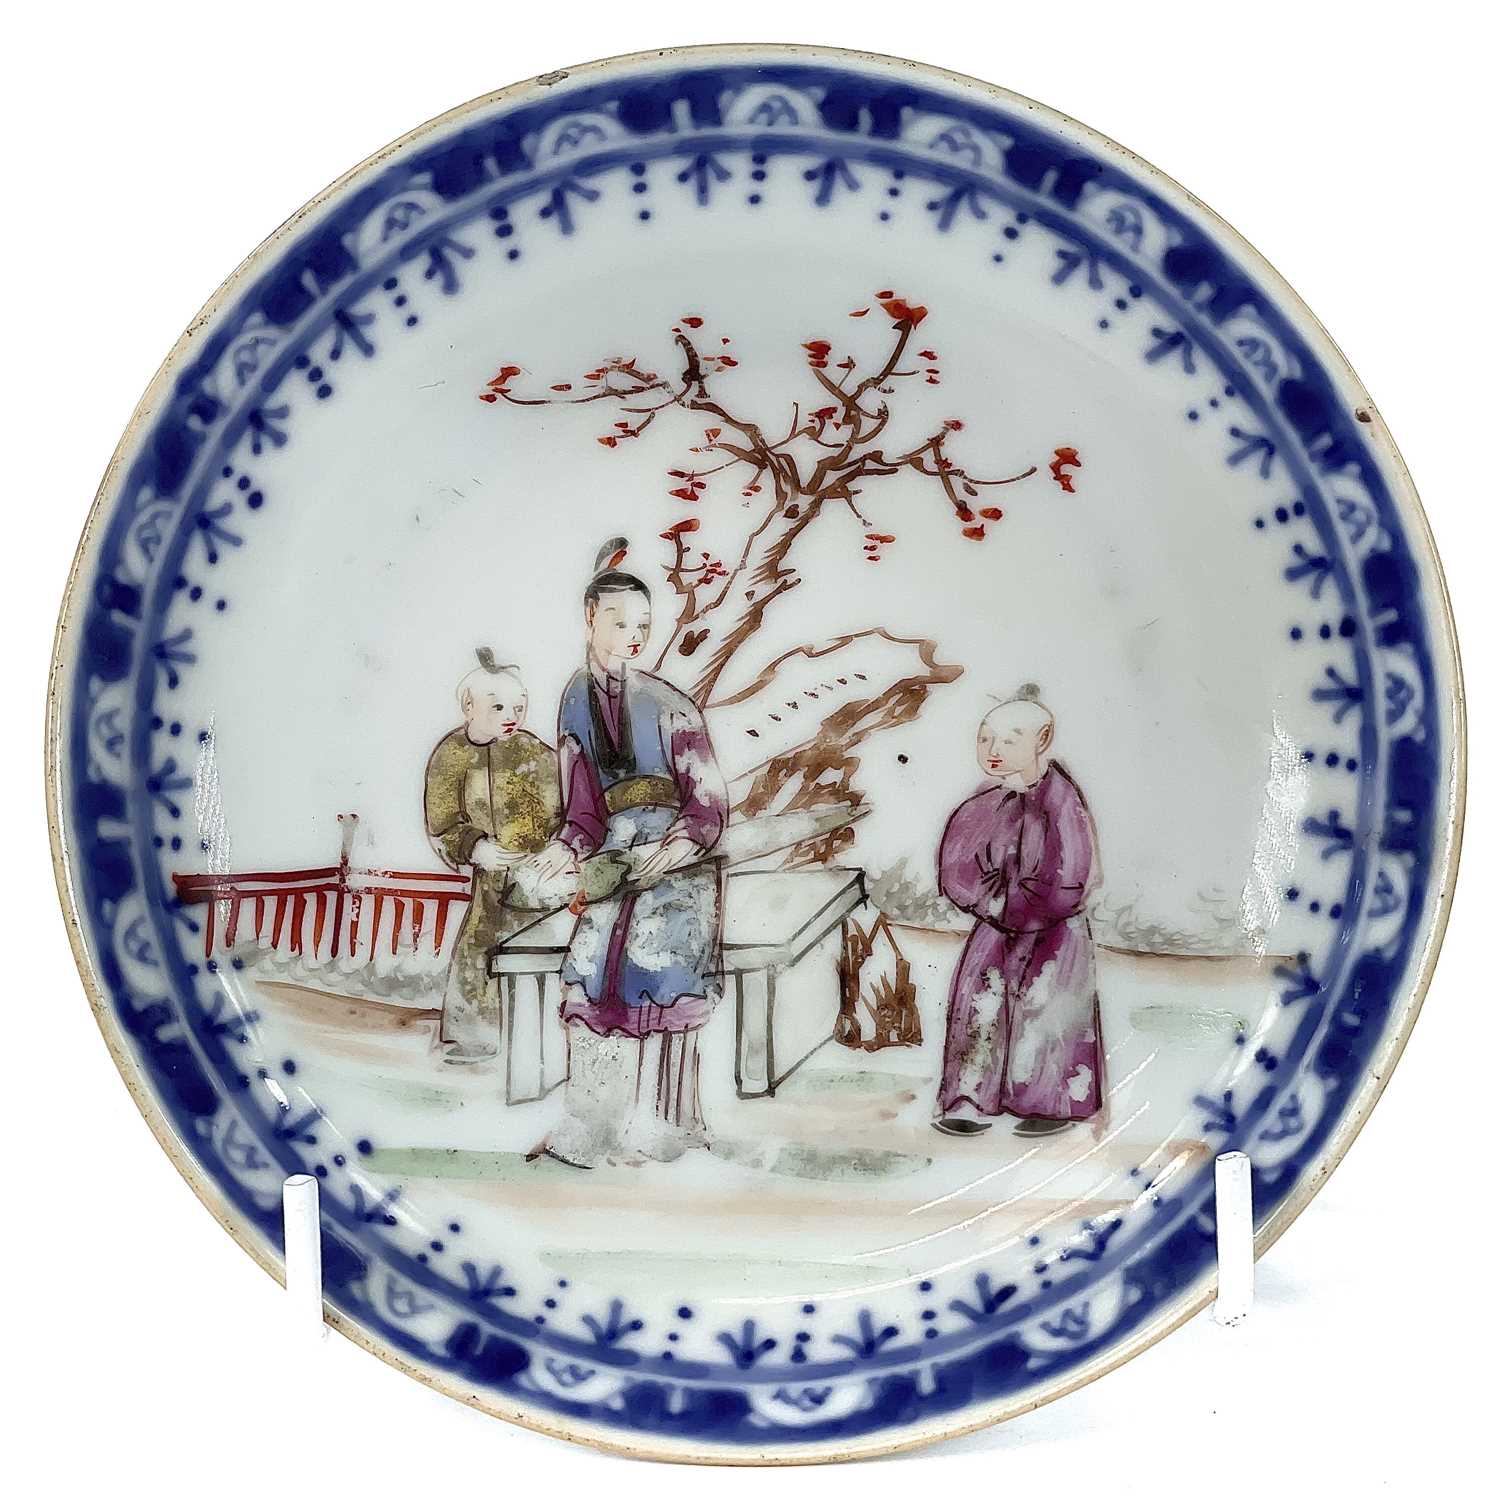 Two Chinese famille rose porcelain saucer dishes, 18th century, diameters 14cm and 12.2cm.one very - Image 2 of 4